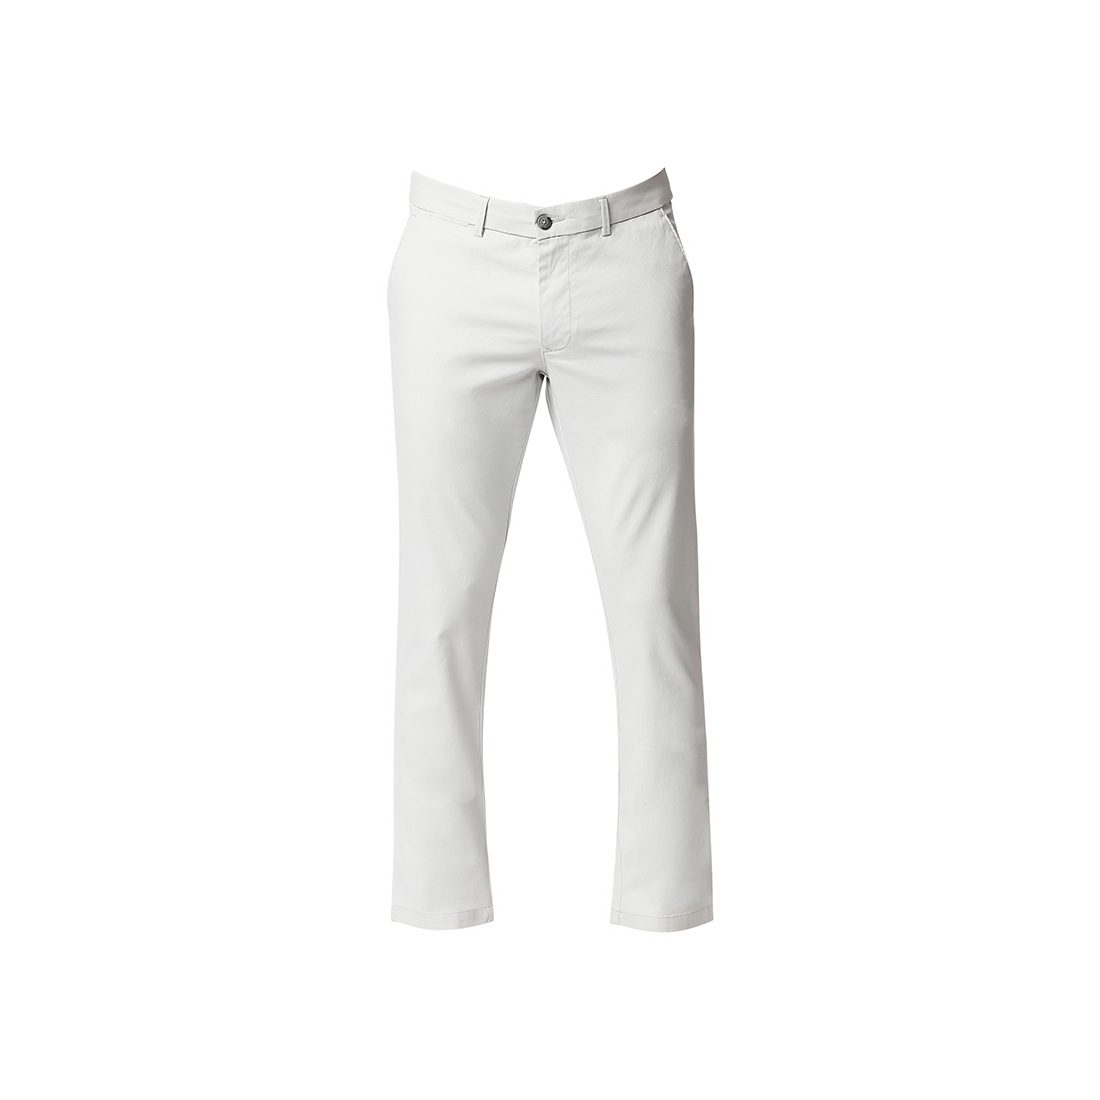 Basics | BASICS CASUAL SELF LIGHT GREY COTTON STRETCH TAPERED TROUSERS  5